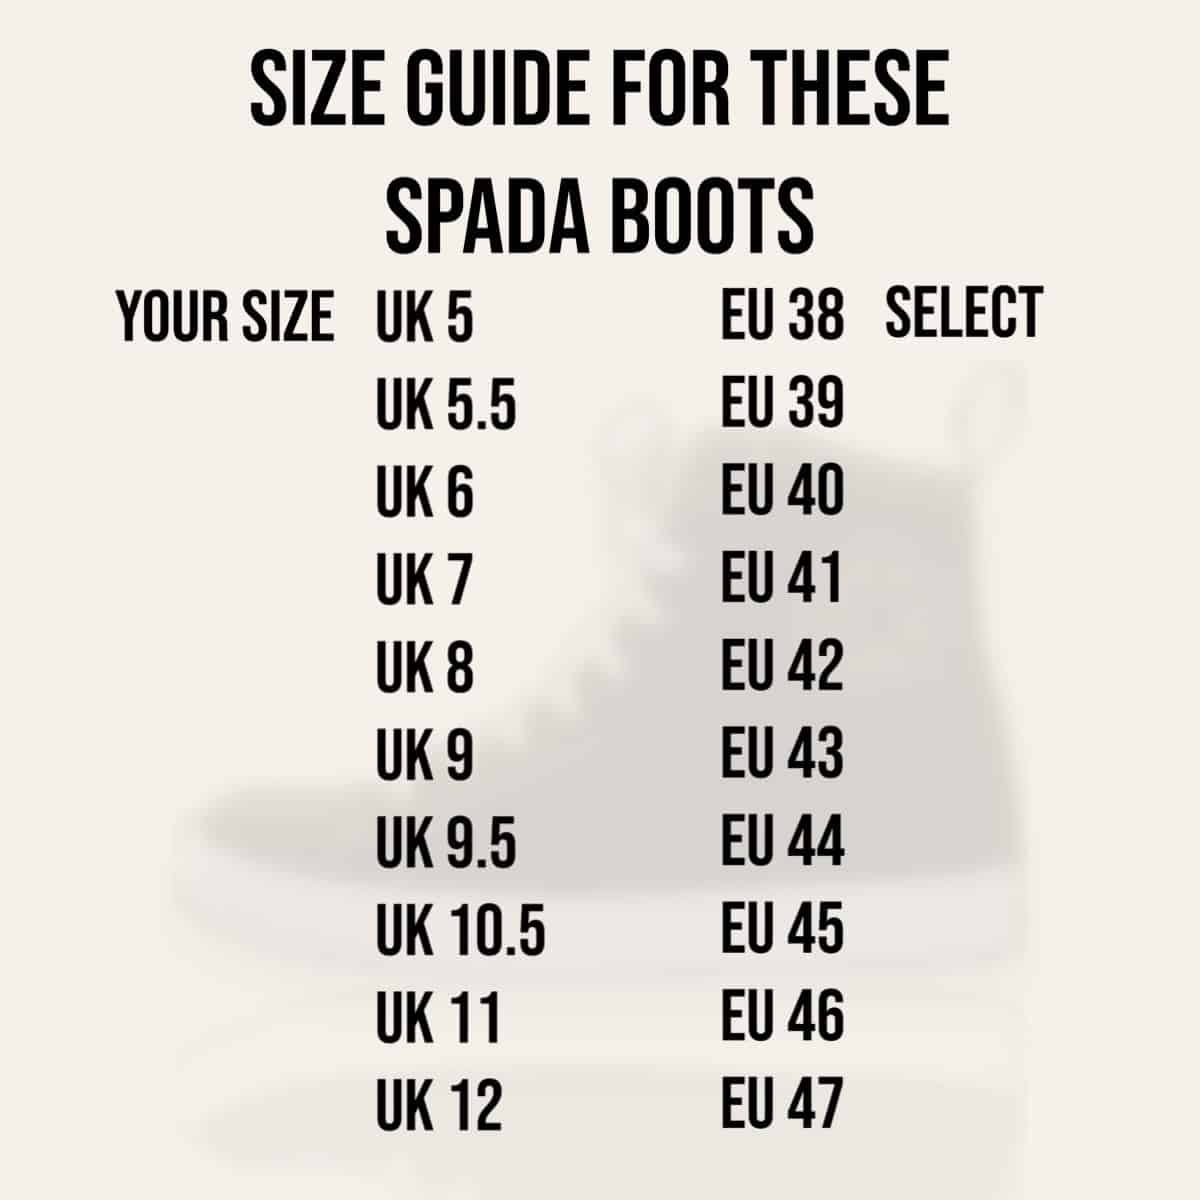 Spada Strider Pro CE WP Boots size guide